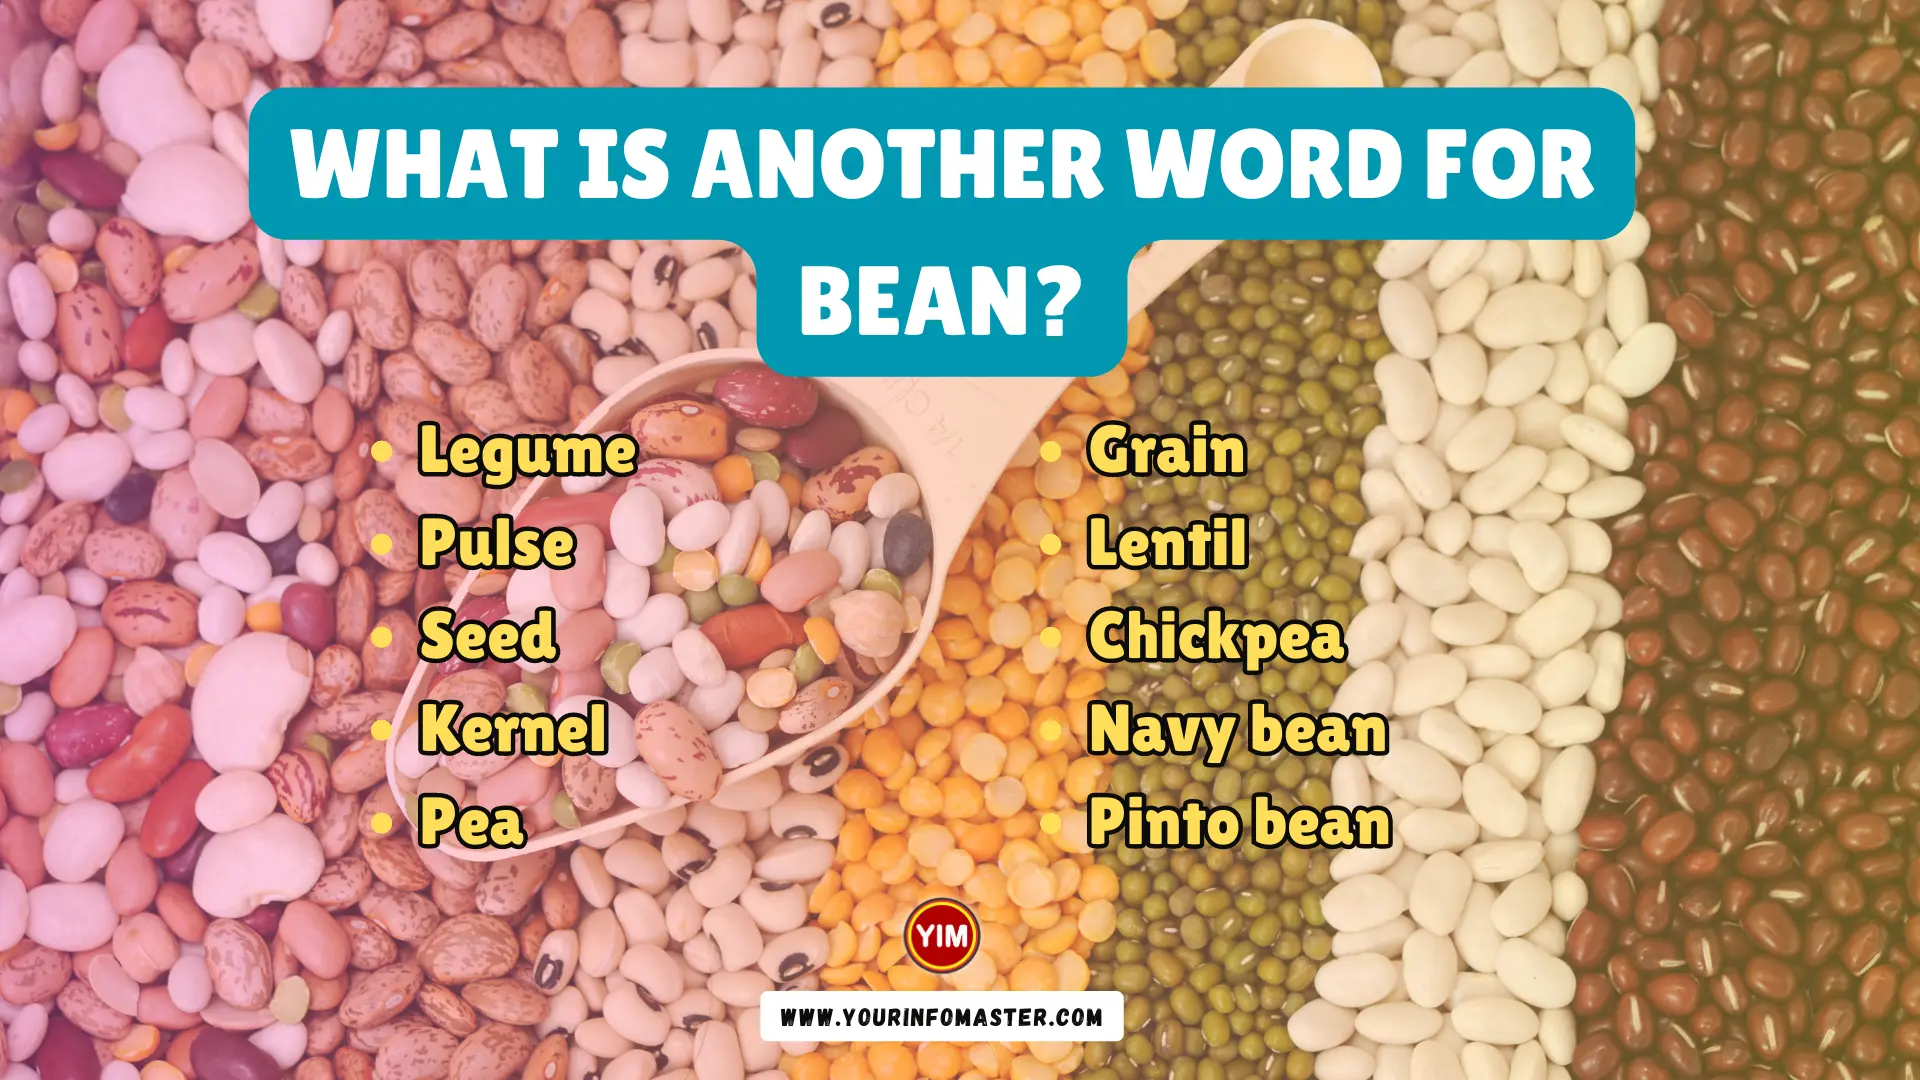 What is another word for Bean